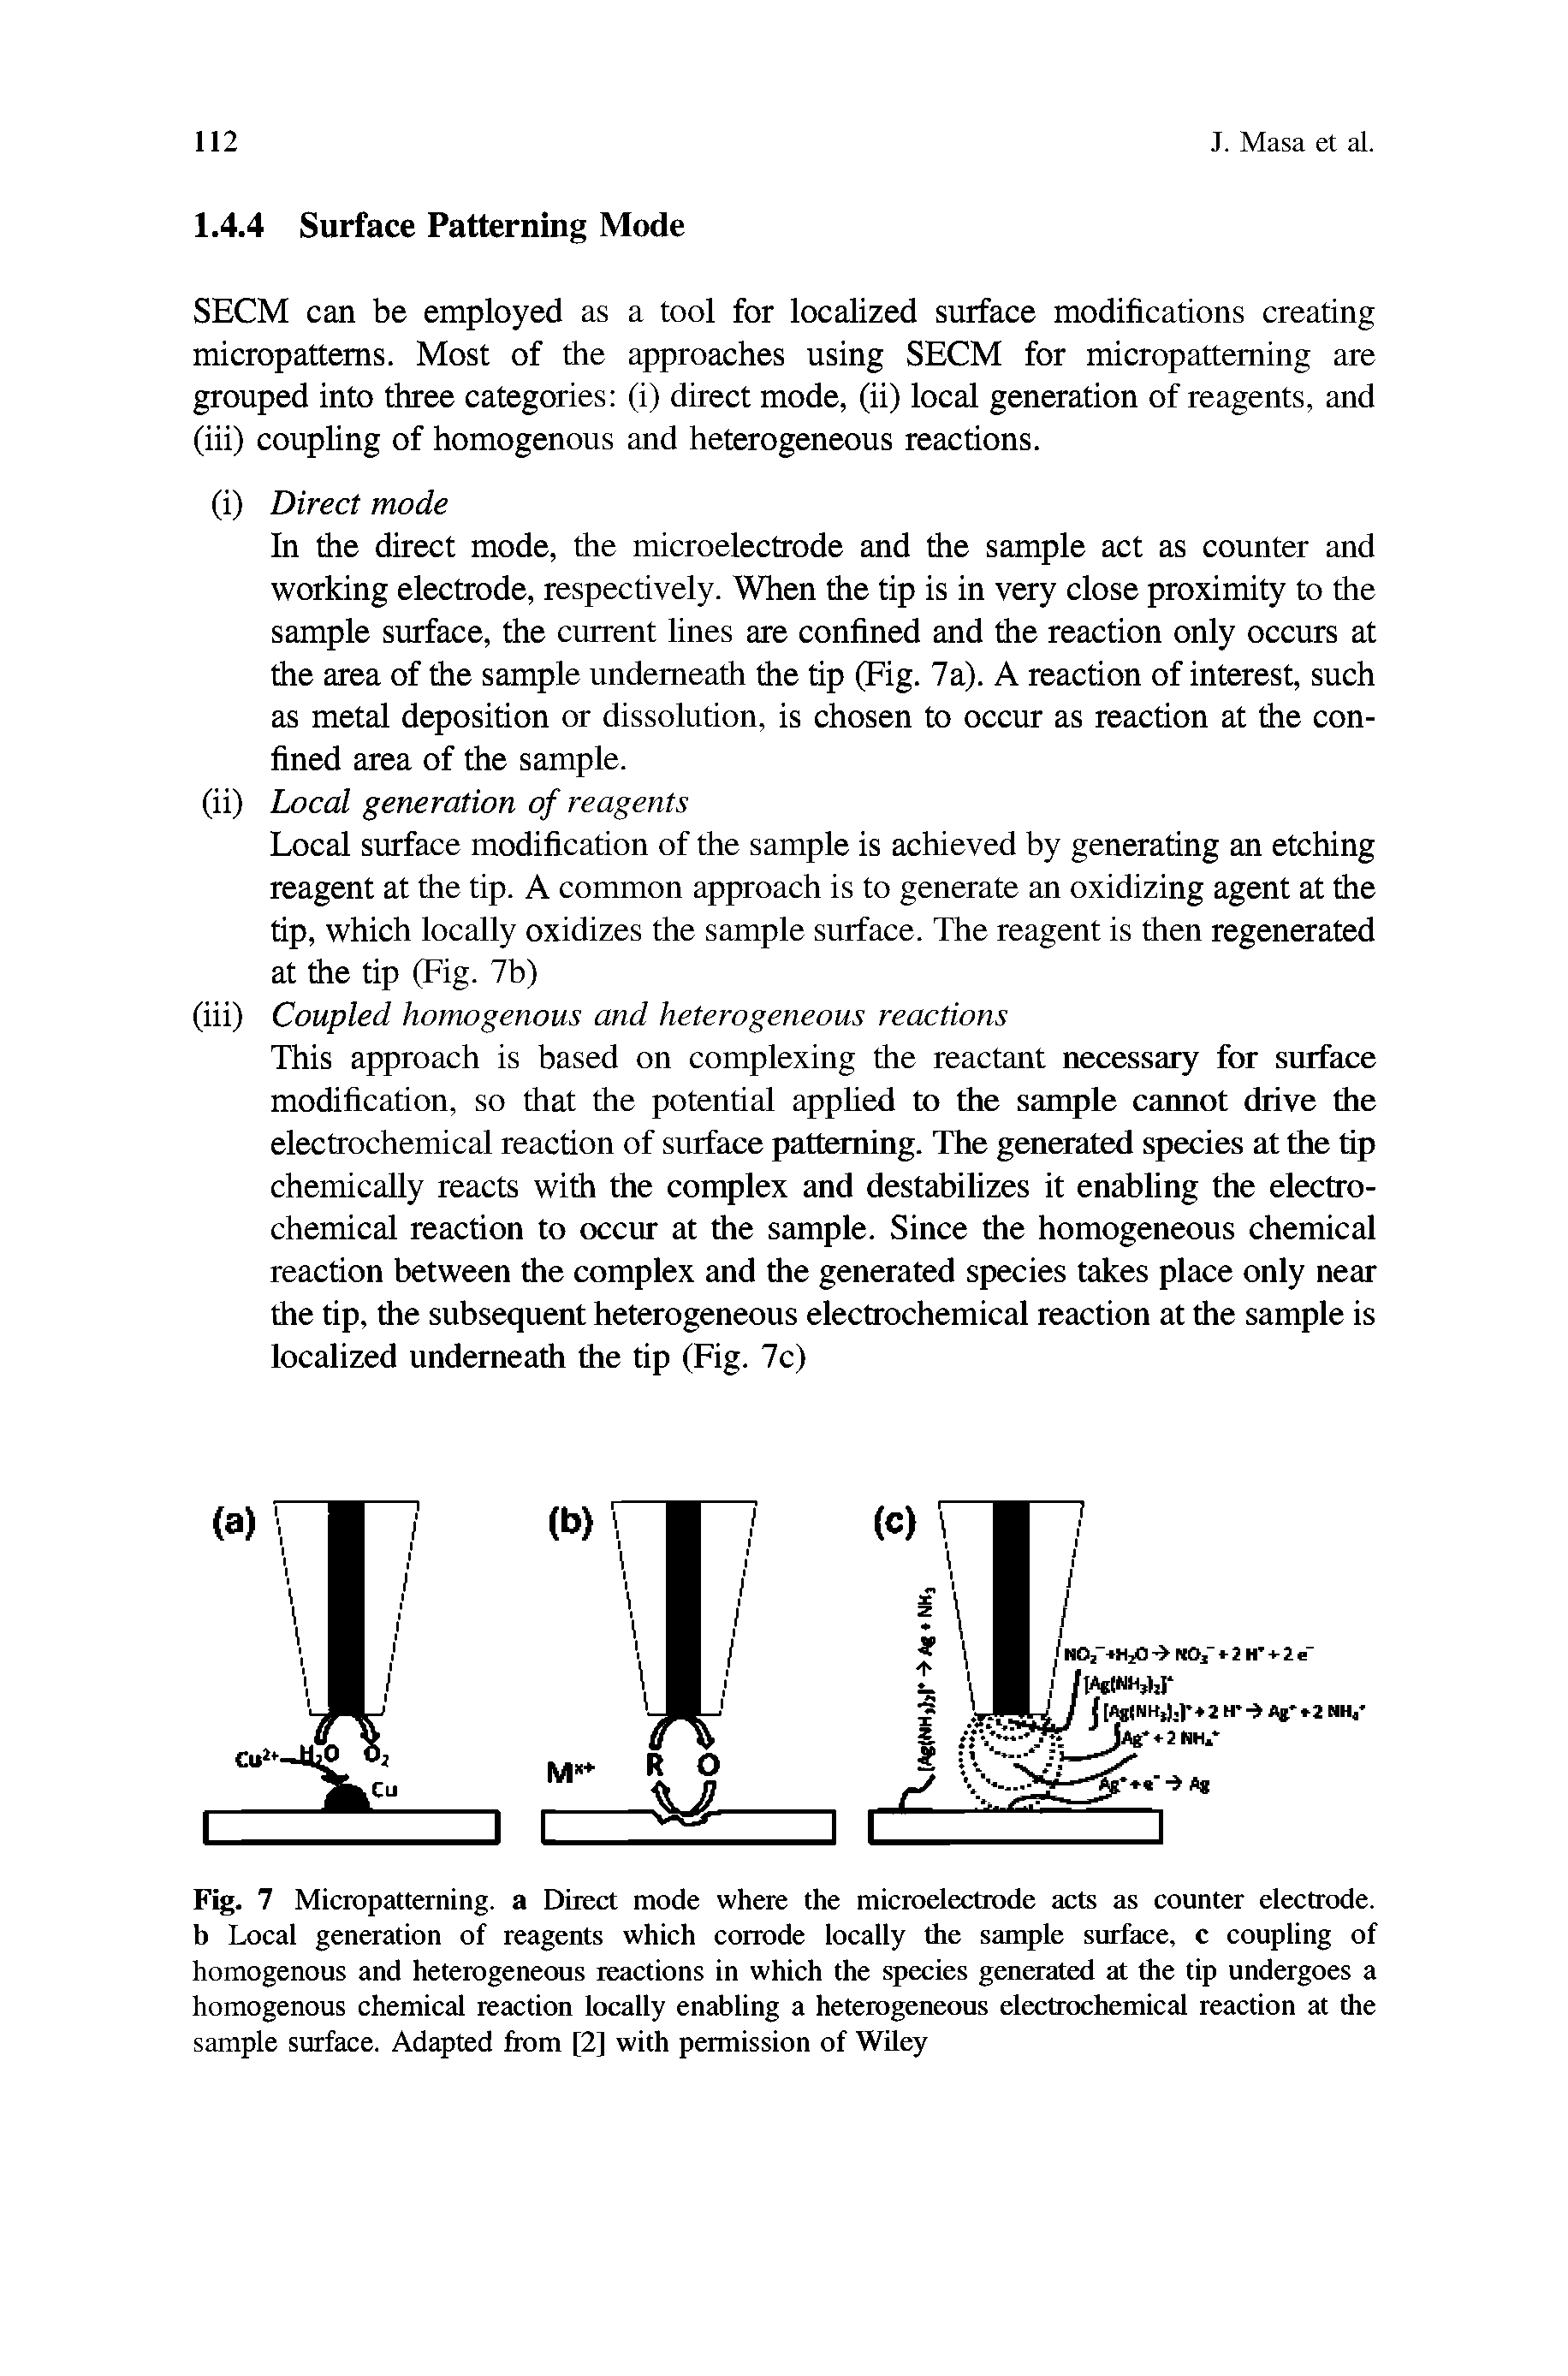 Fig. 7 Micropatteming. a Direct mode where the microelectrode acts as counter electrode, b Local generation of reagents which corrode locally the sample surface, c coupling of homogenous and heterogeneous reactions in which the species generated at the tip undergoes a homogenous chemical reaction locally enabling a heterogeneous electrochemical reaction at the sample surface. Adapted from [2] with permission of Wiley...